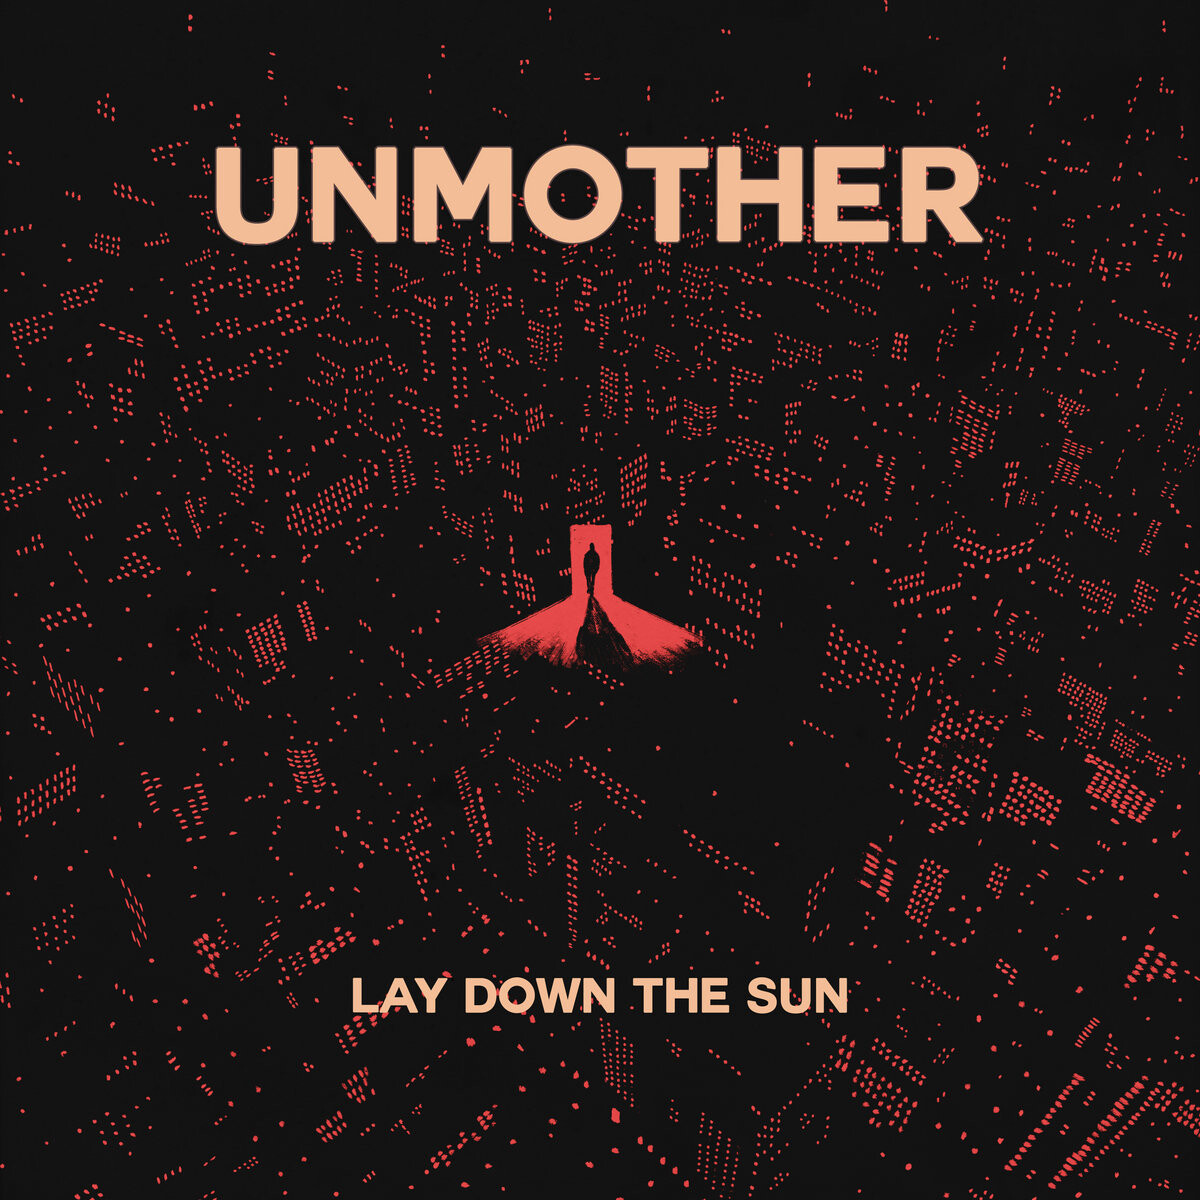 unmother-lay-down-the-sun